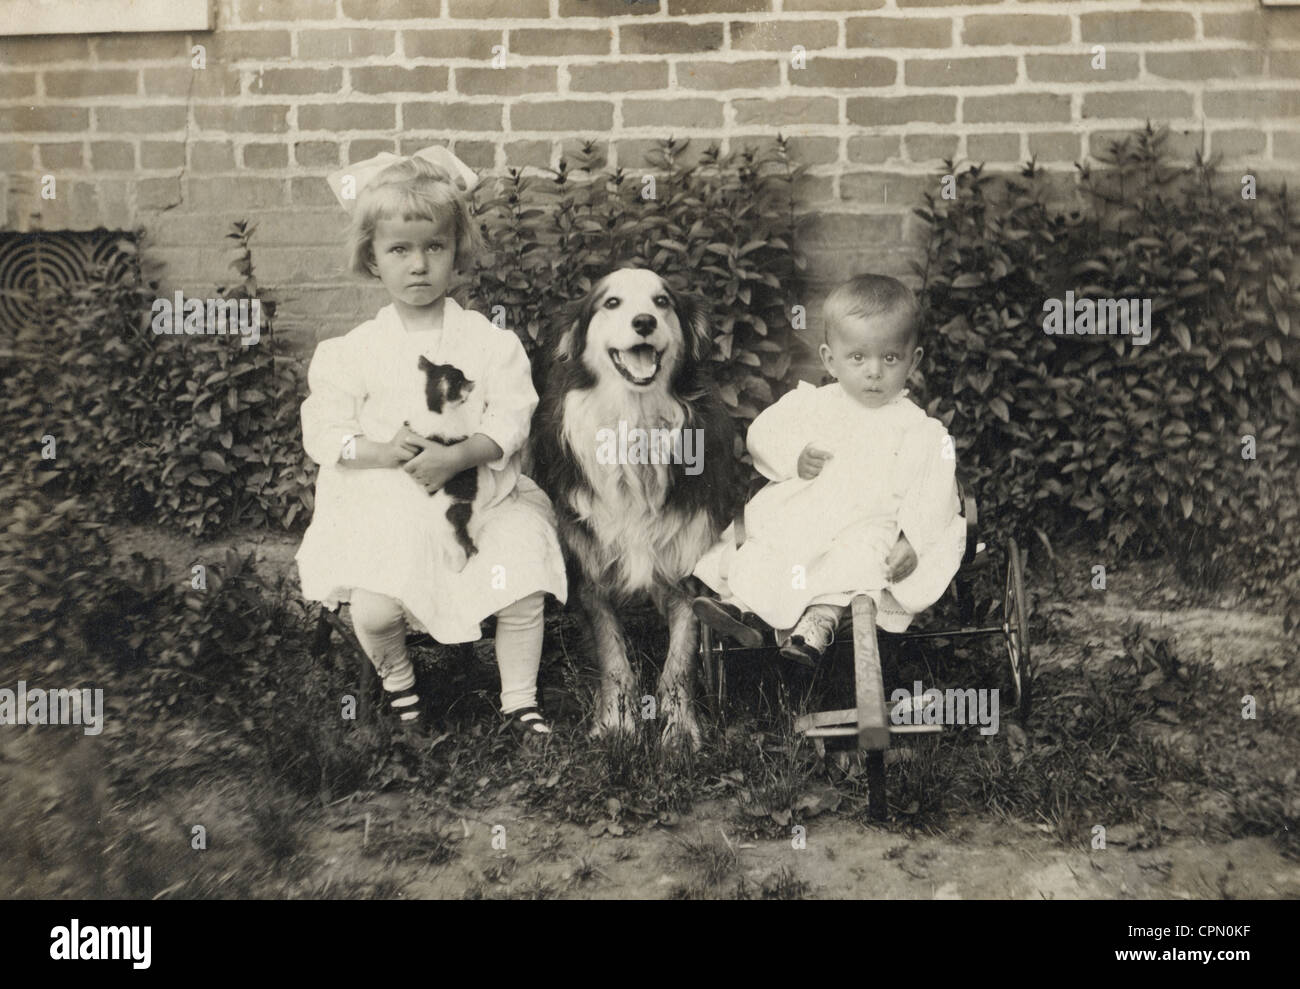 Two Little Children with Large Dog Between Them Stock Photo